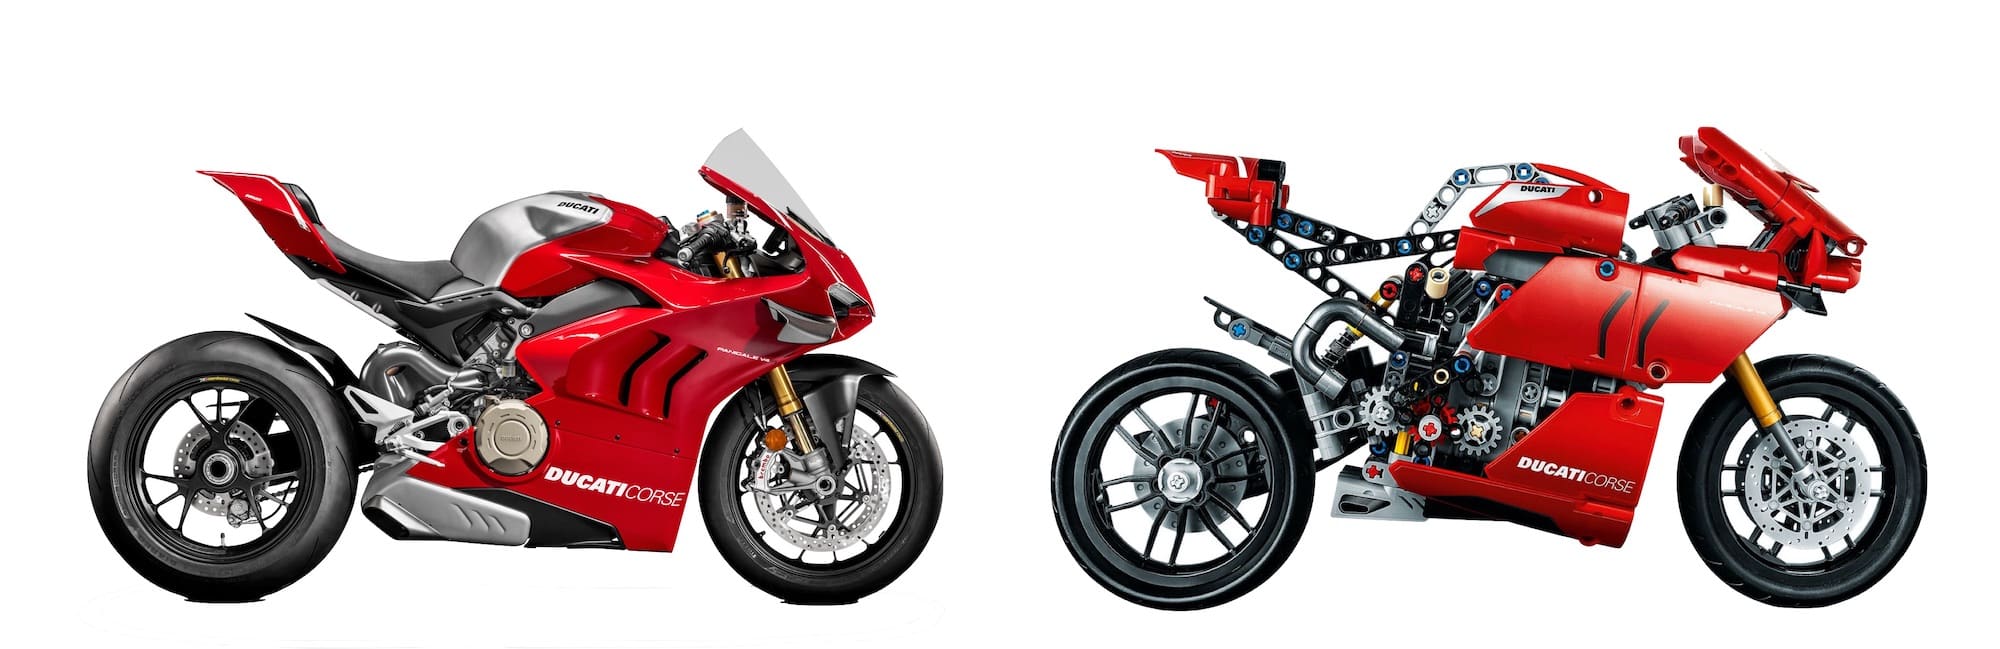 Ducati Panigale V4R and the Lego Ducati Panigale V4R side by side